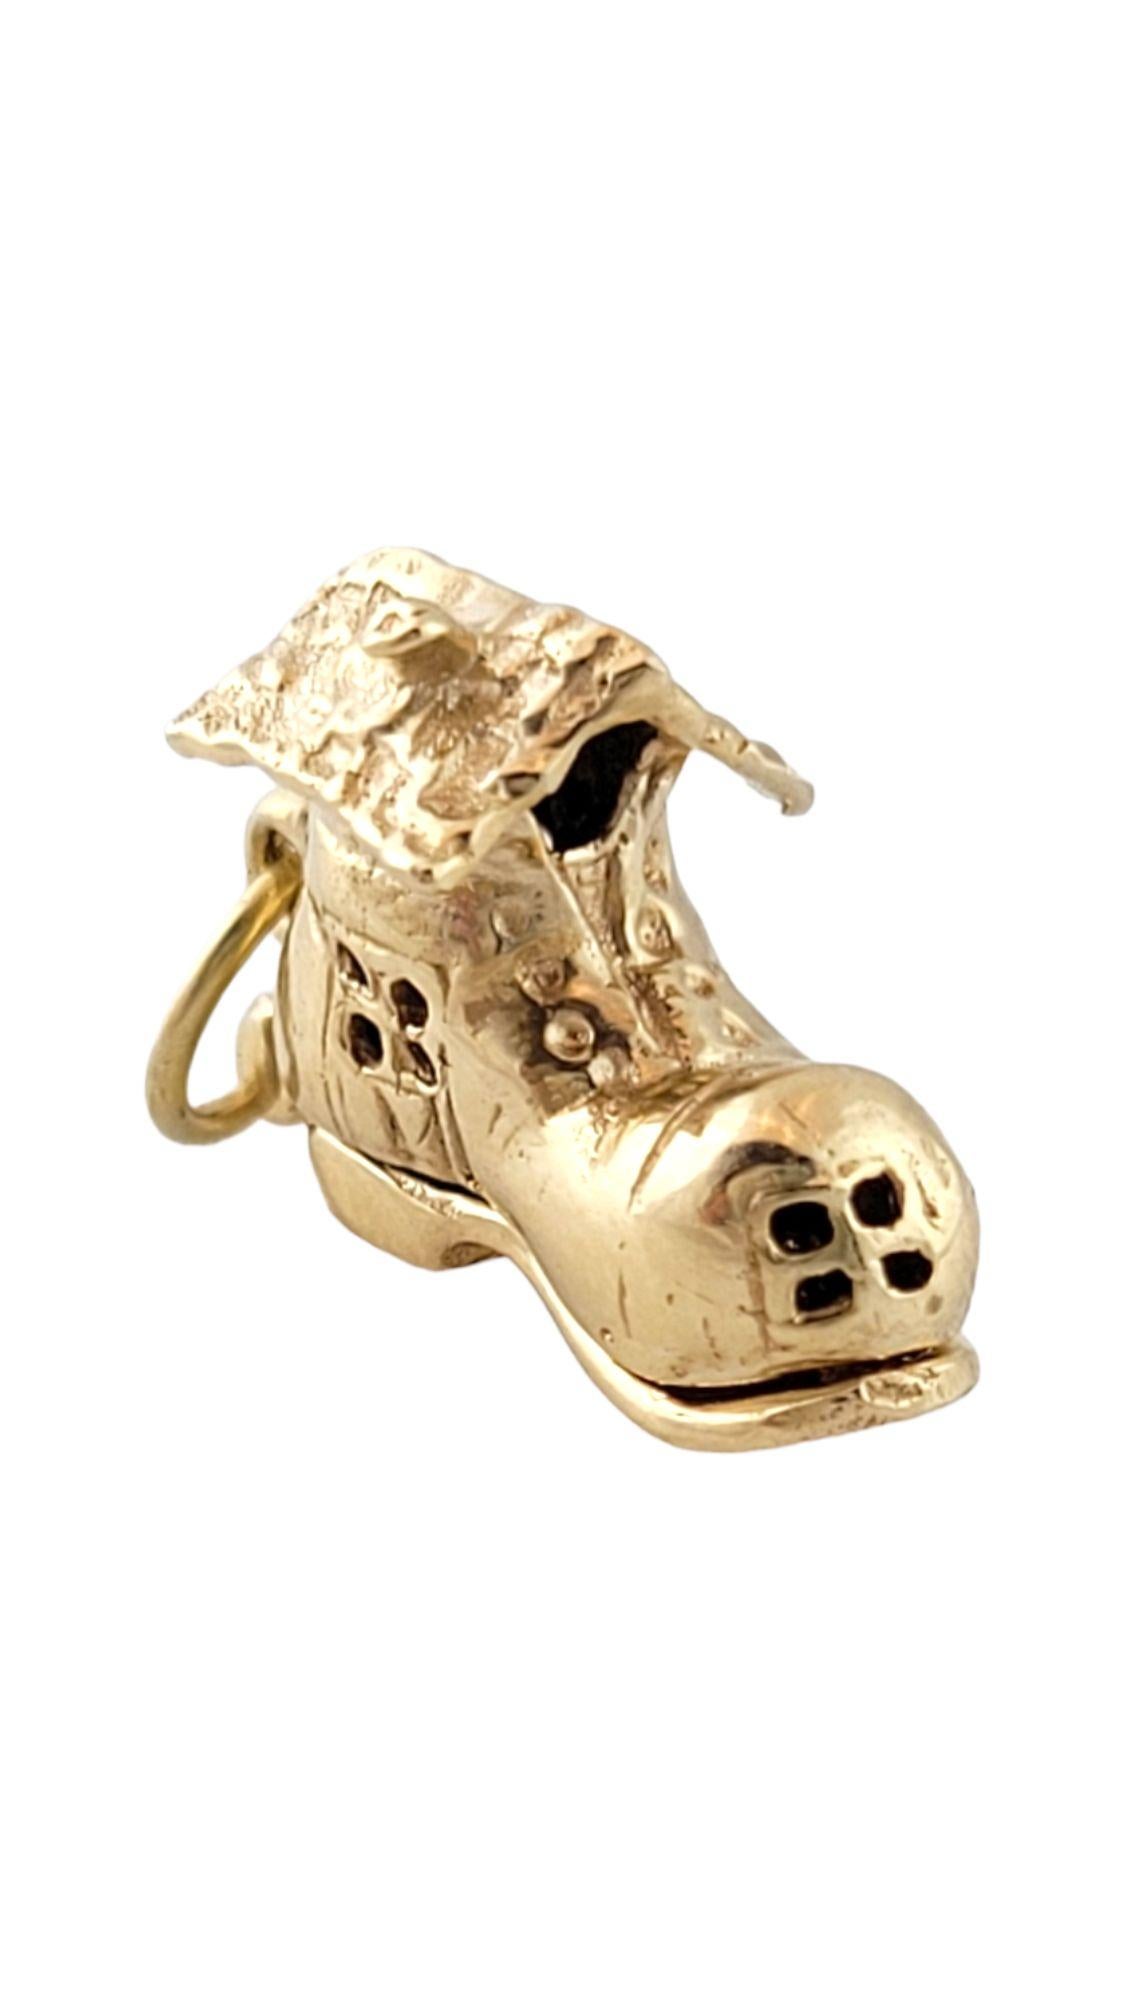 Adorable 14K yellow gold old woman in a shoe charm!

Size: 17.1mm X 12mm X 7mm

Length w/ bail: 21mm

Weight: 3.76 g/ 2.4 dwt

Hallmark: 14K

Very good condition, professionally polished.

Will come packaged in a gift box or pouch (when possible)